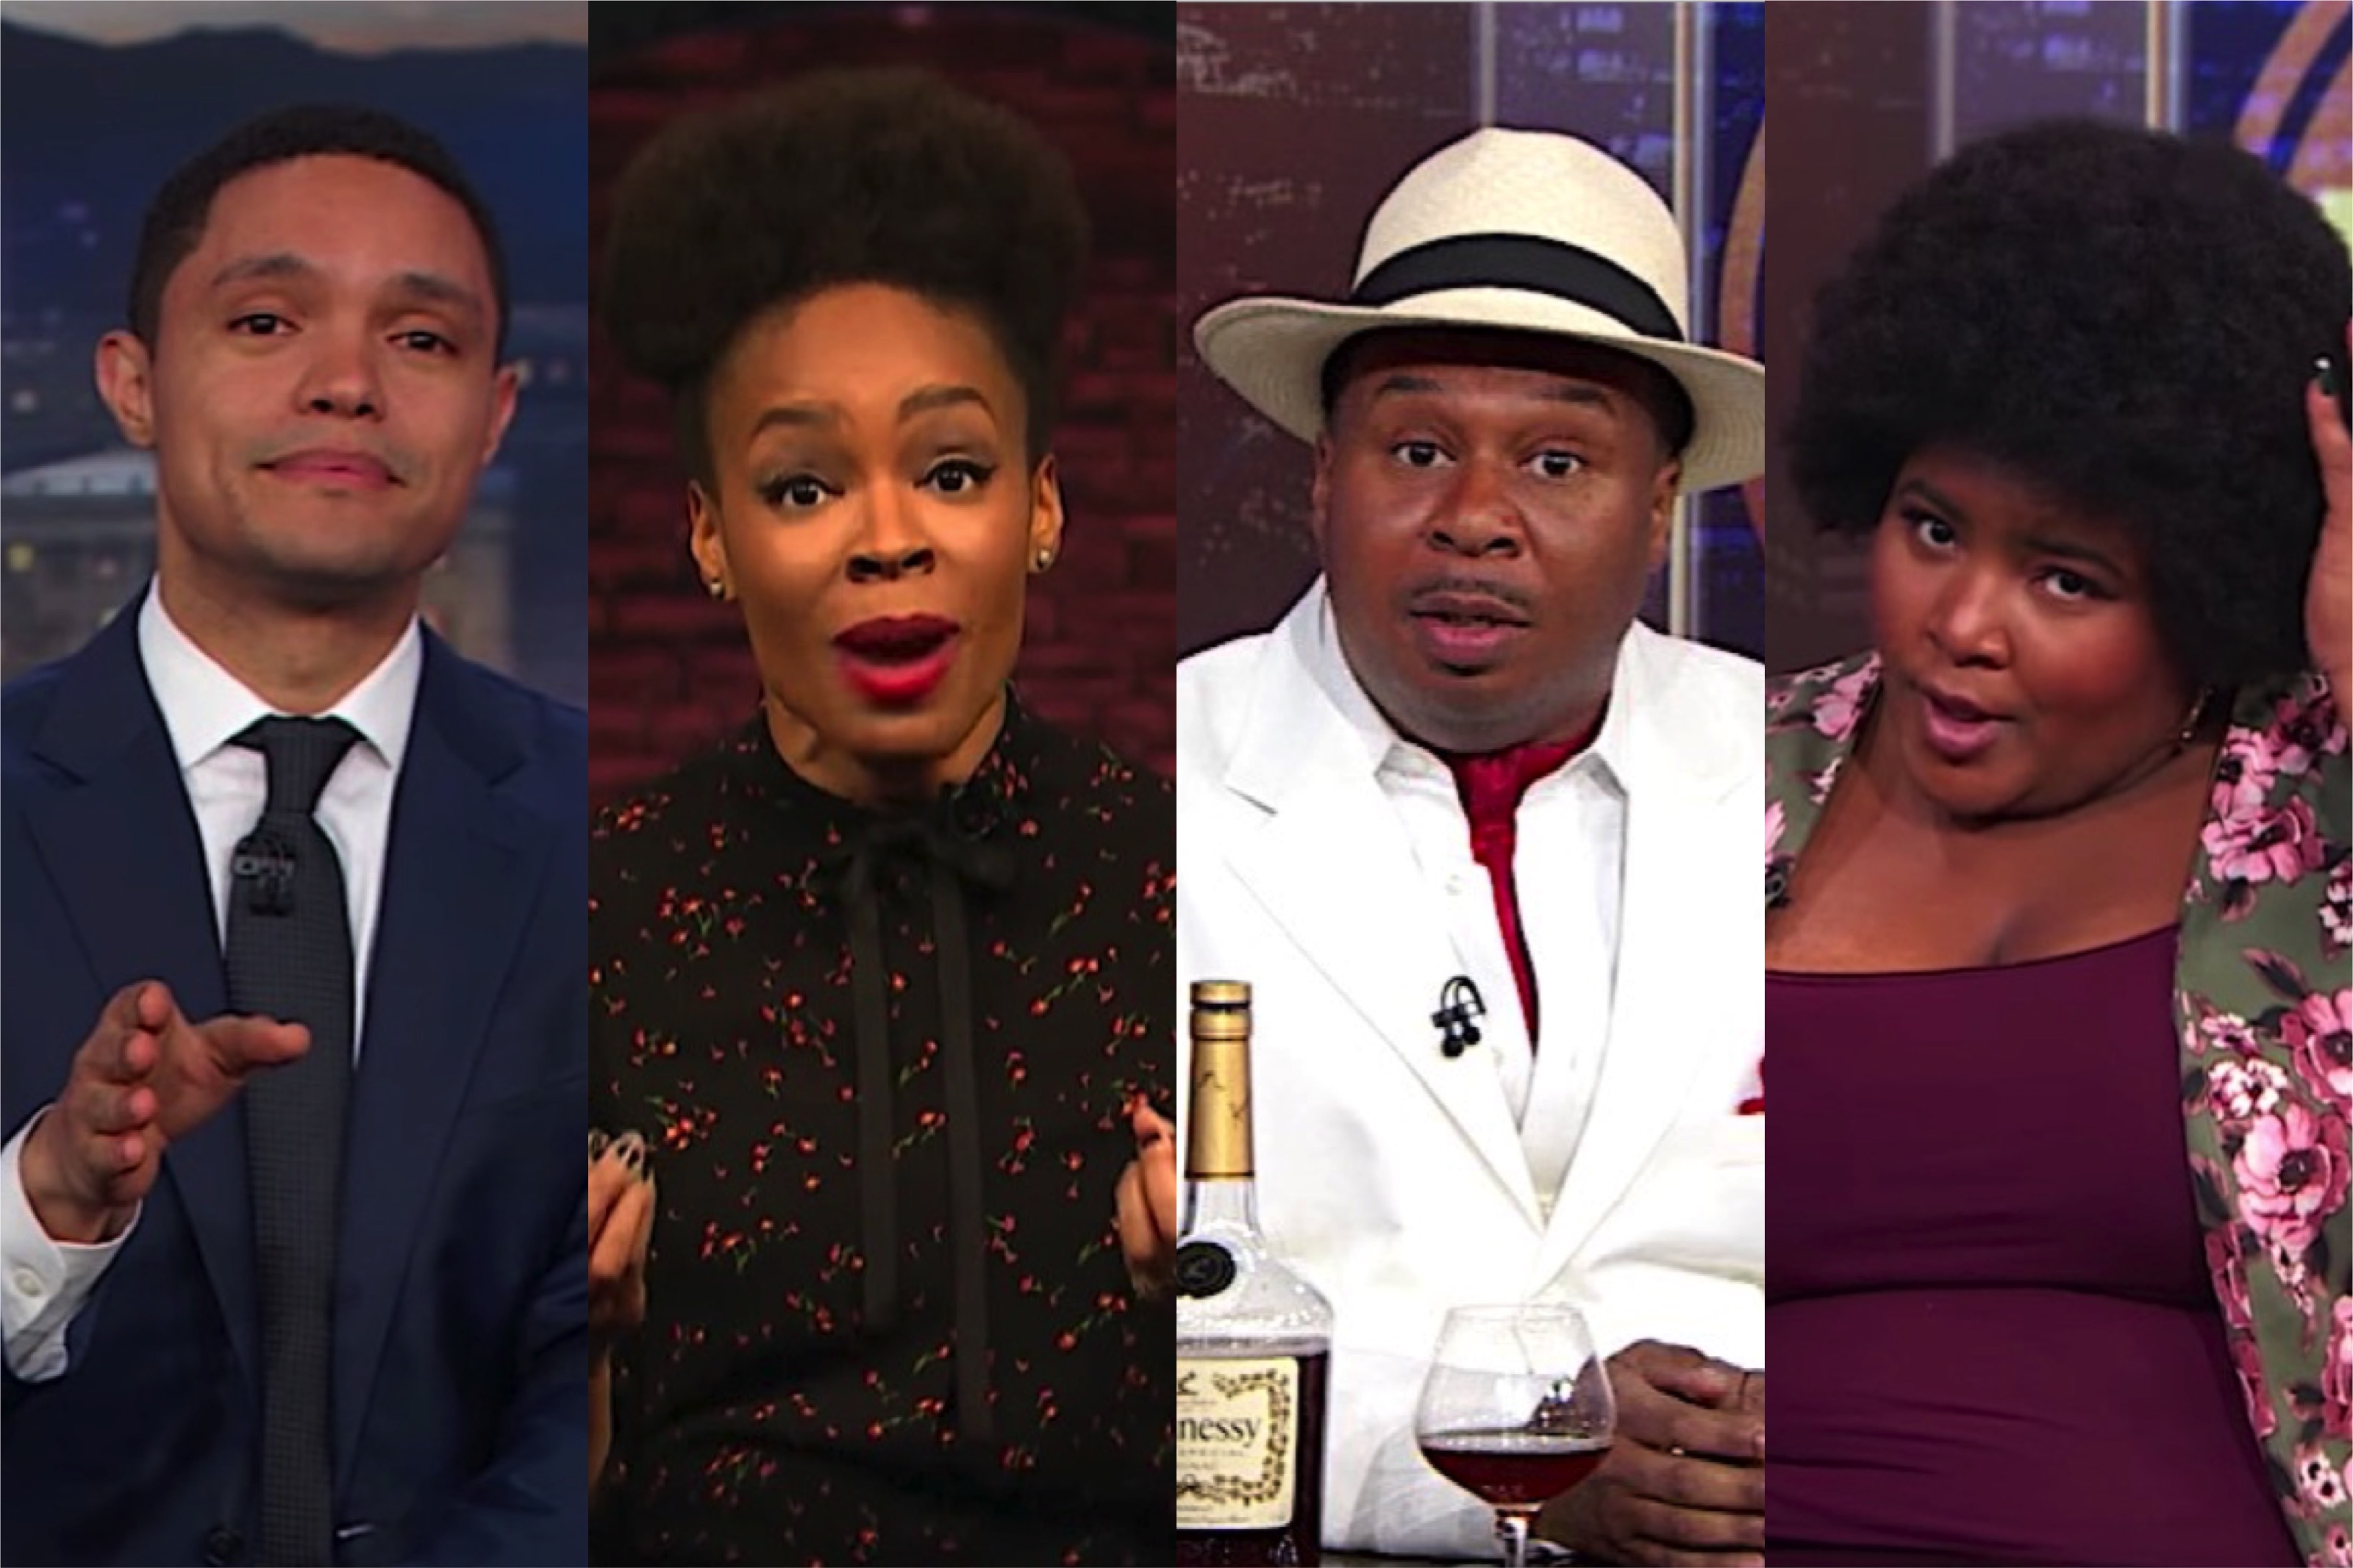 Four black comedians take a bow over Roy Moore defeat